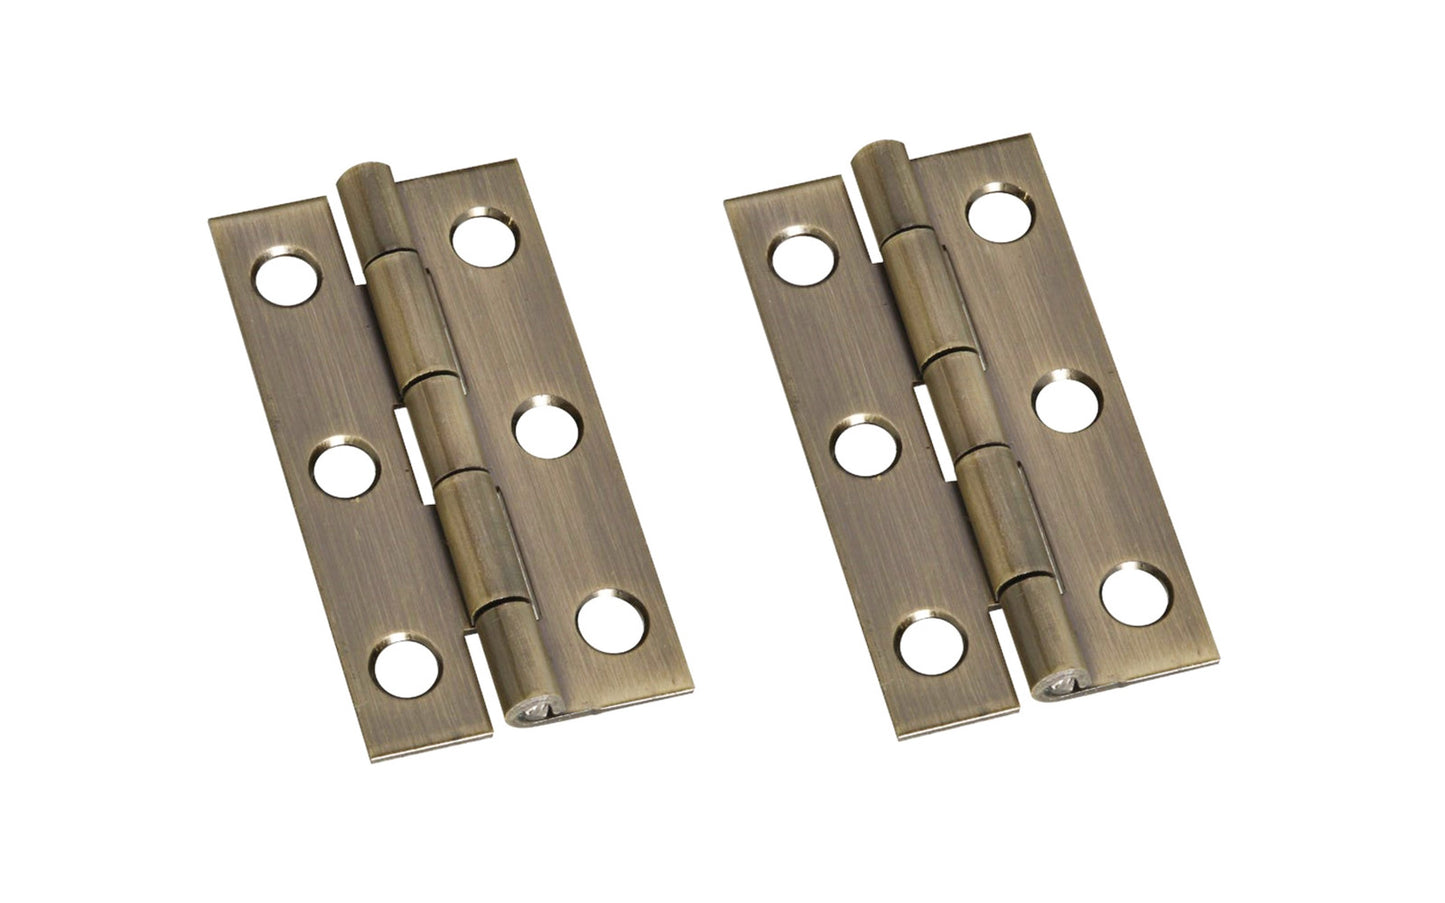 2" x 1" Antique Brass Hinges ~ 2 Pack. These antique brass hinges add a decorative appearance to small boxes, jewelry boxes, small lightweight cabinet doors, craft projects. Solid brass material with an antique brass finish. Surface mount. Non-removable pin. Pair of hinges. National Hardware Model No. N211-243. 